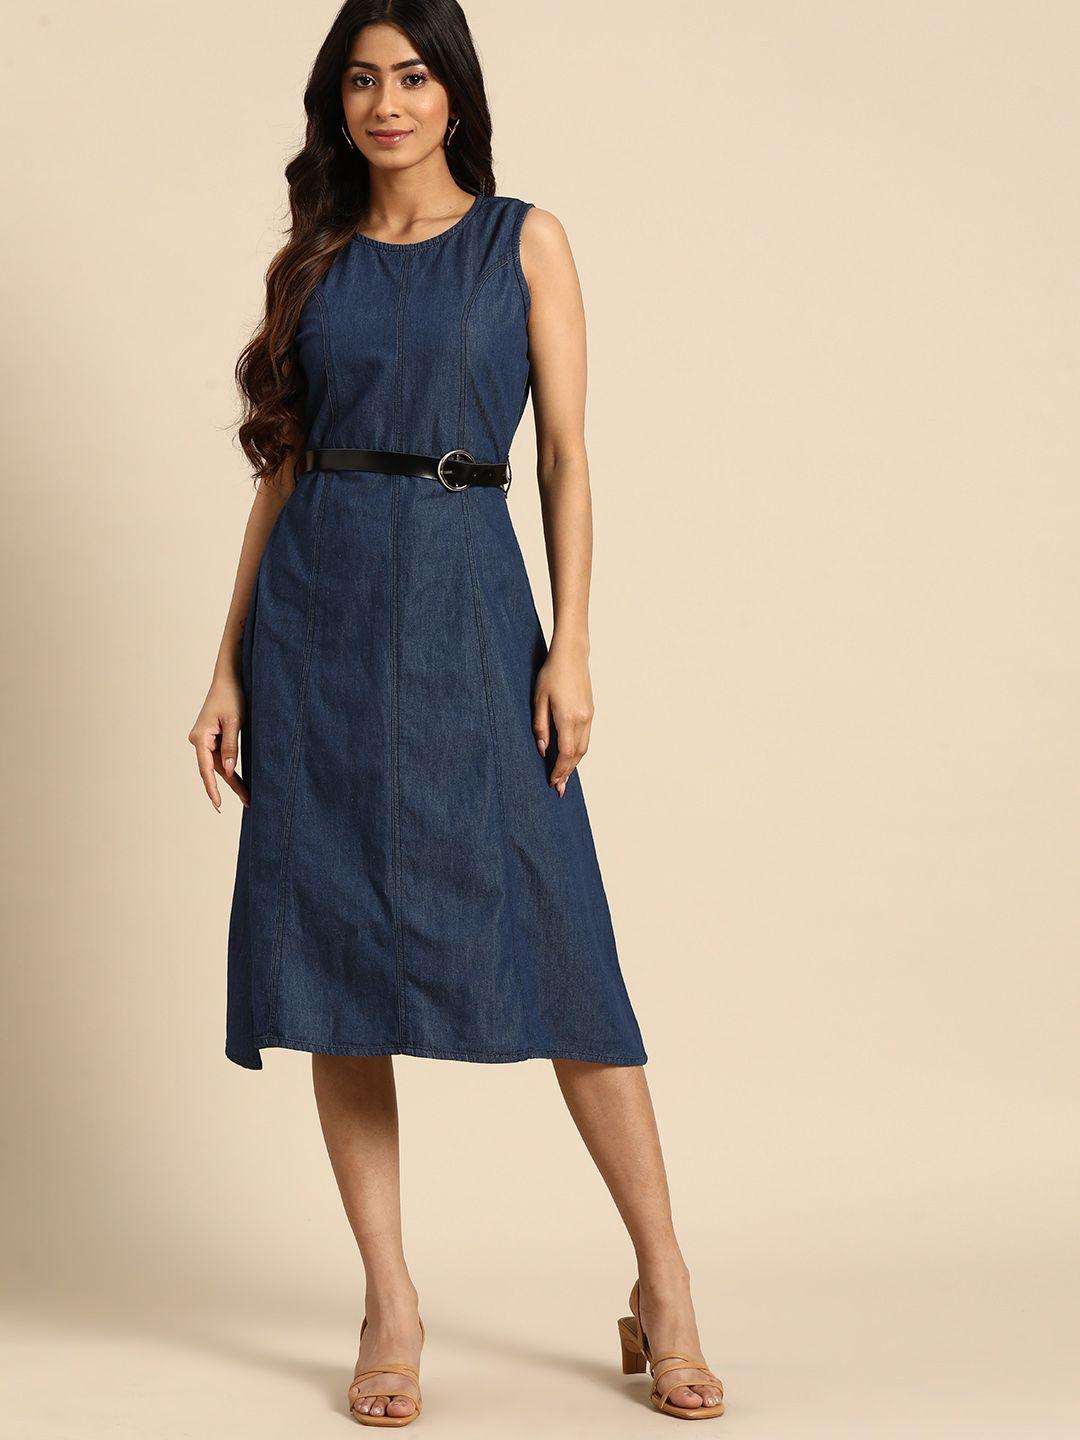 all about you chambray finish a-line pure cotton dress with detachable belt